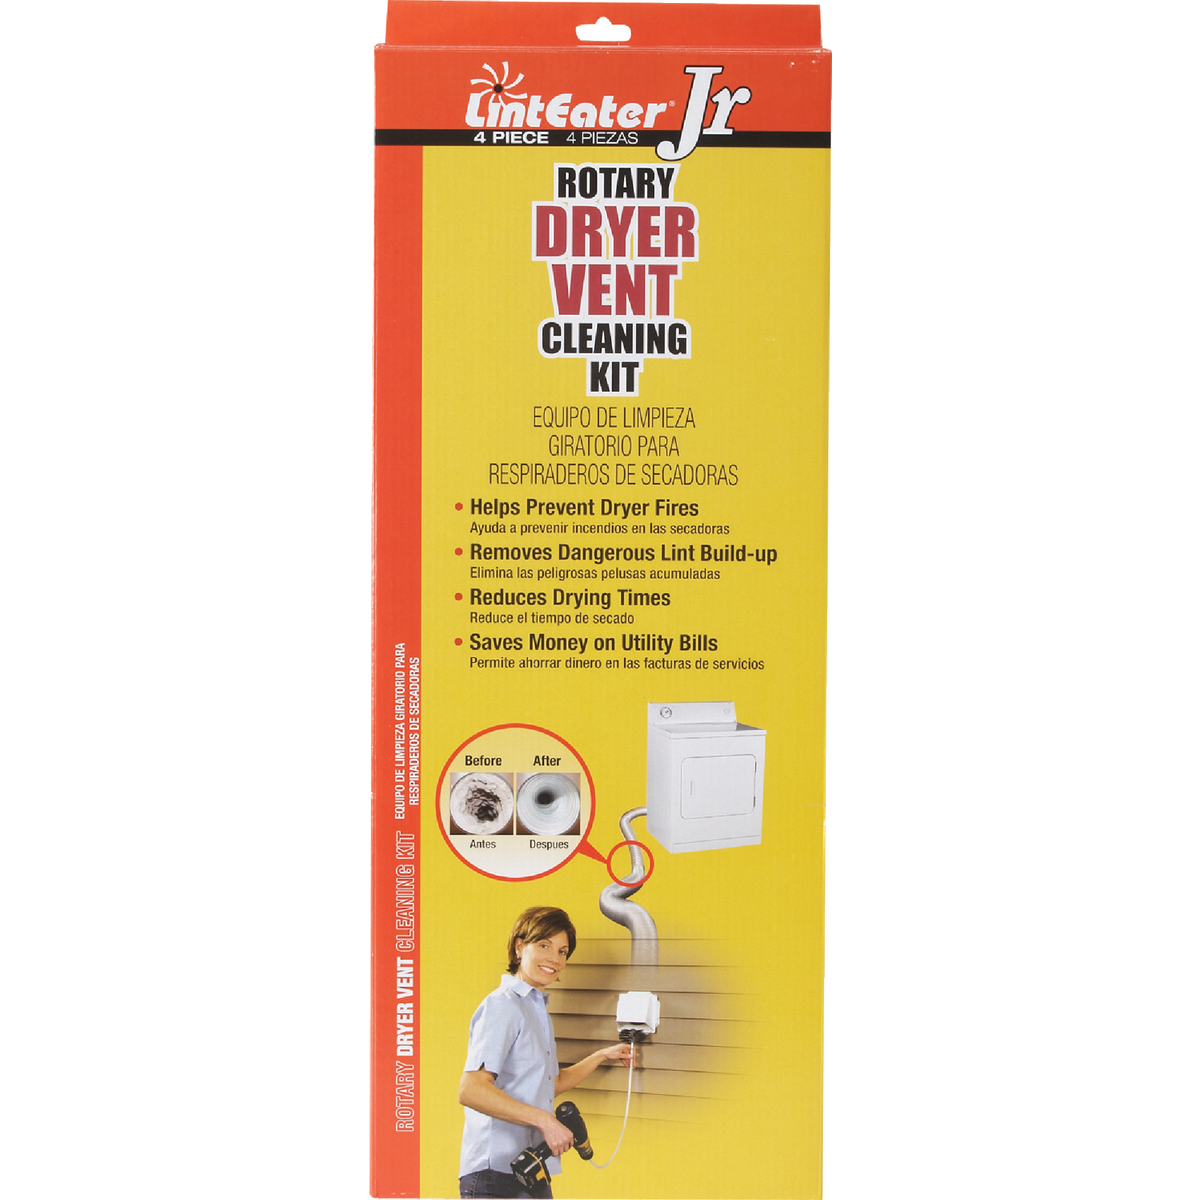 Clothes Dryer Cleaners & Accessories